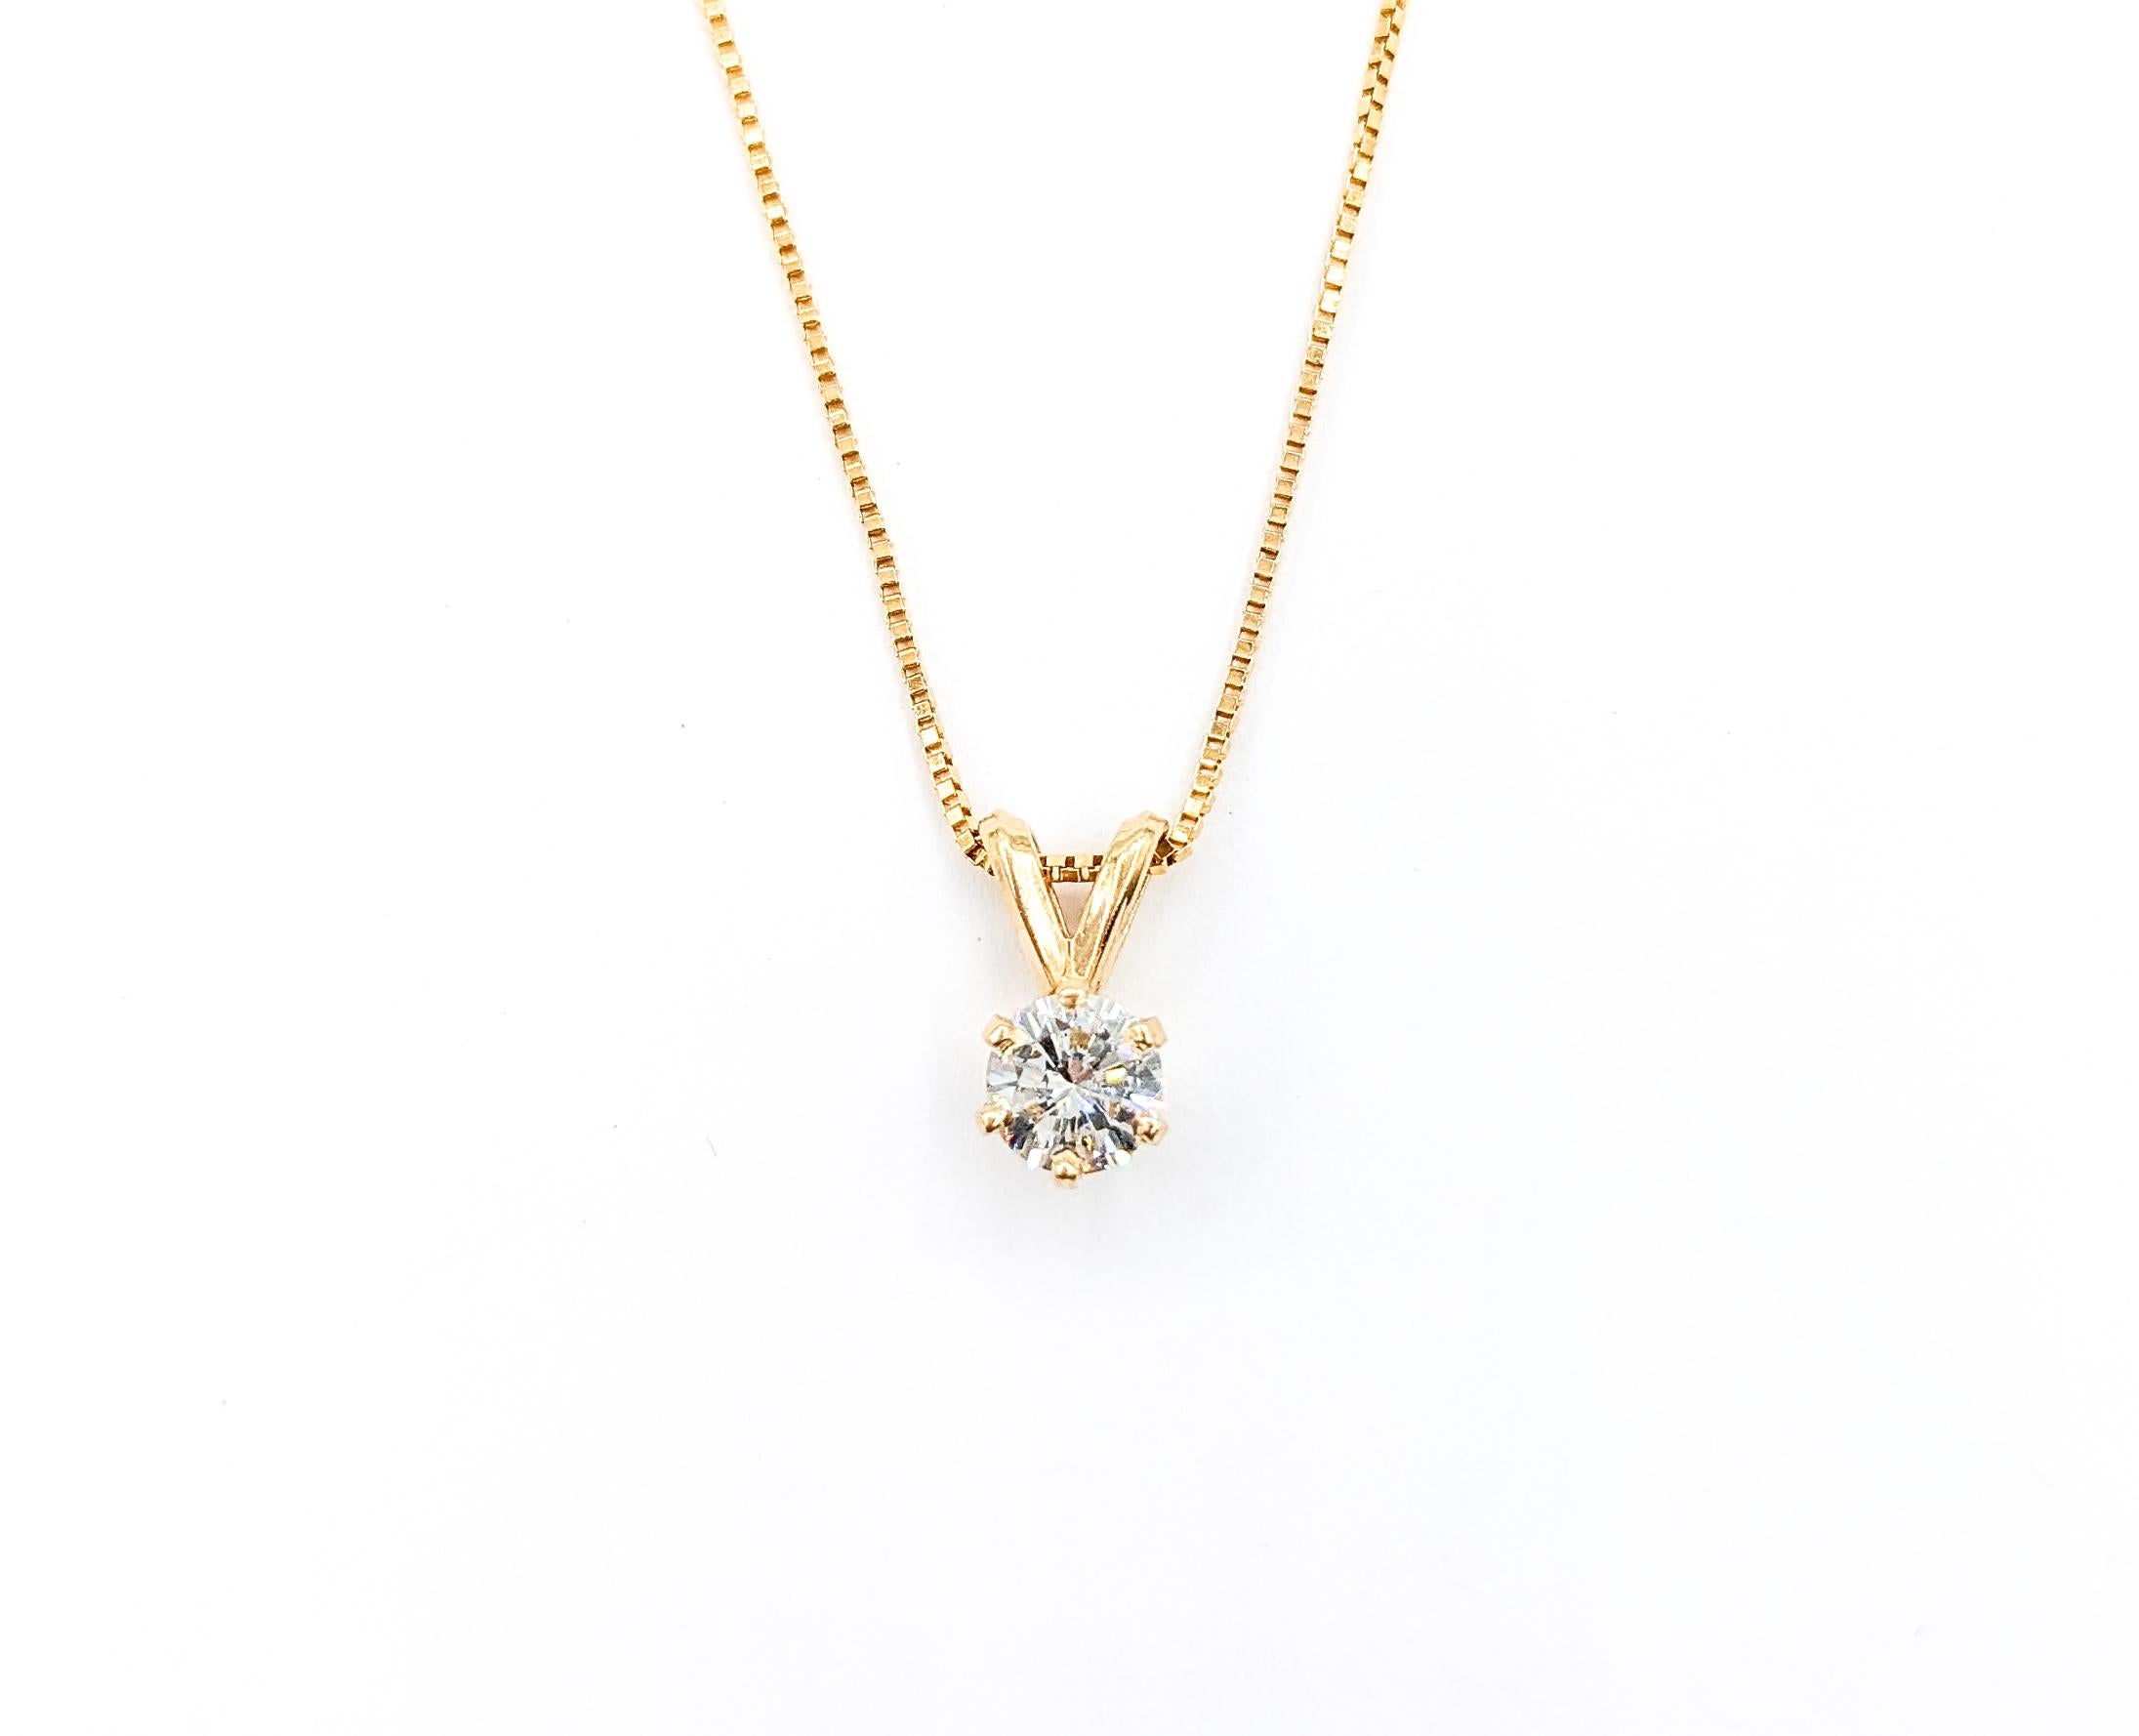 42ct Diamond 6-Prong Desing Pendant With Chain In Yellow Gold

This exquisite Diamond Fashion Pendant with Chain is masterfully crafted in 14kt Yellow Gold, featuring a .42ct diamond set in a classic solitaire 6-prong design. The diamond boasts VS